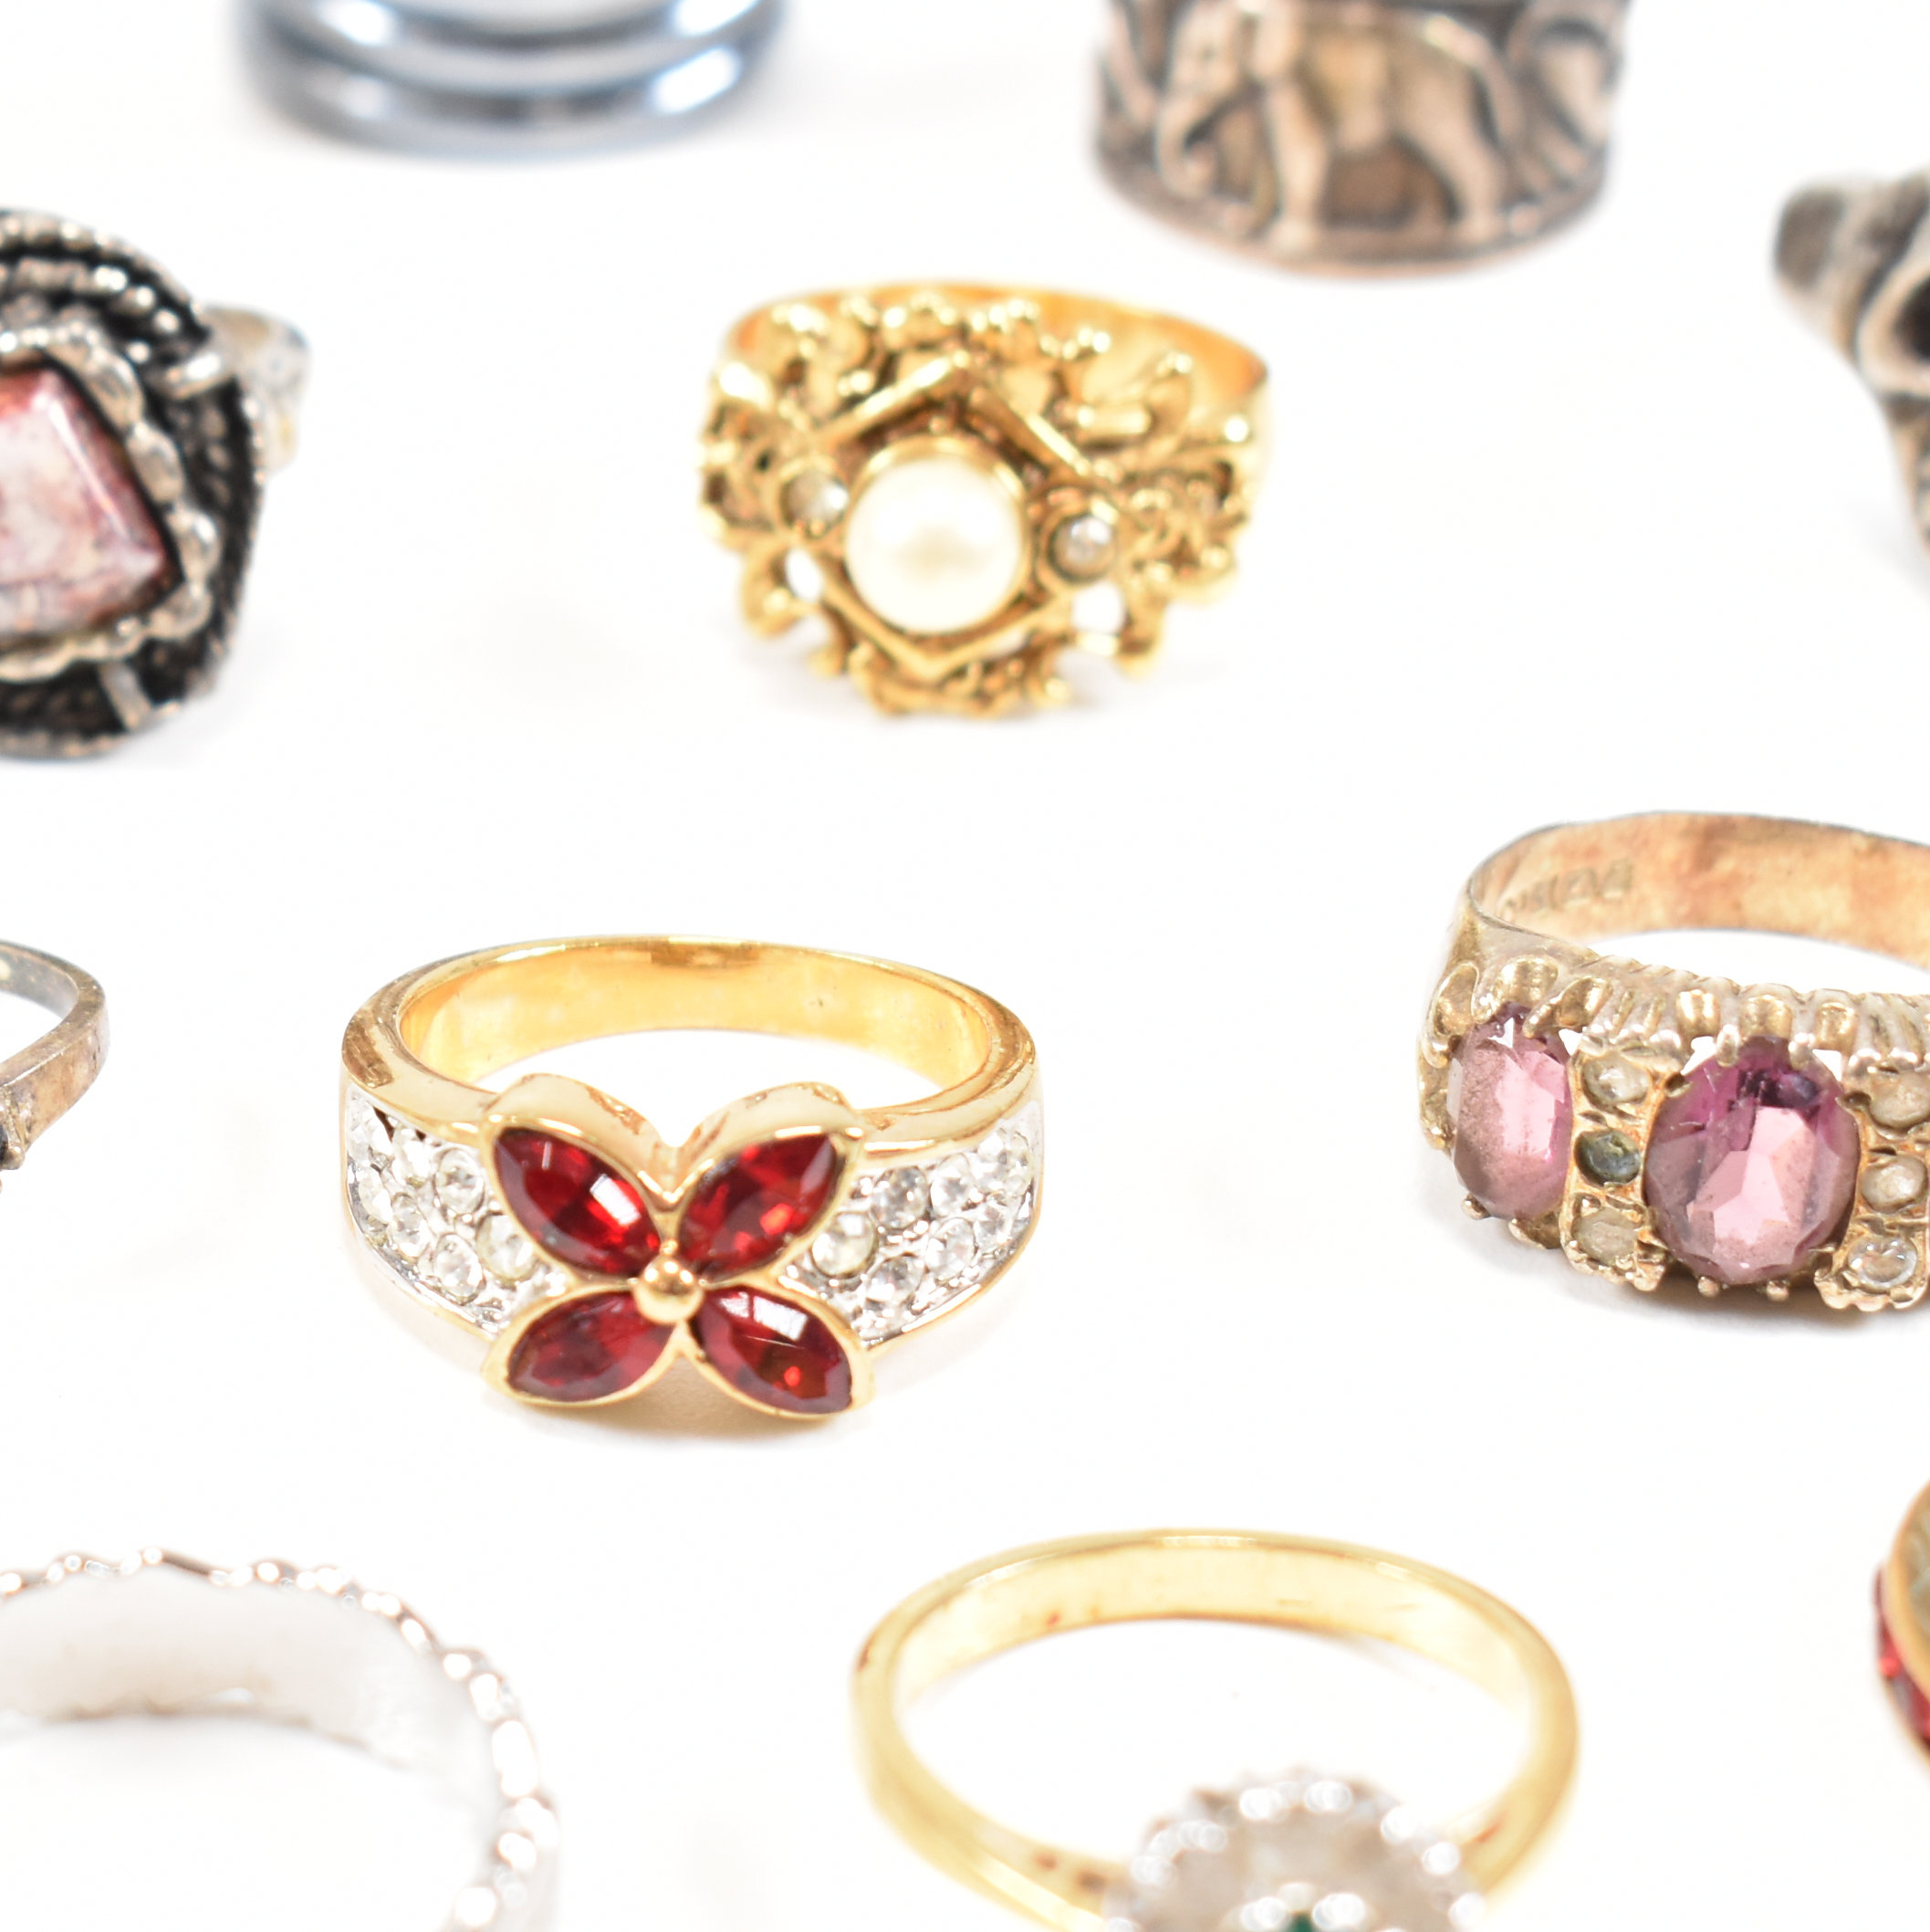 COLLECTION OF VINTAGE & MODERN COSTUME JEWELLERY RINGS - Image 5 of 10